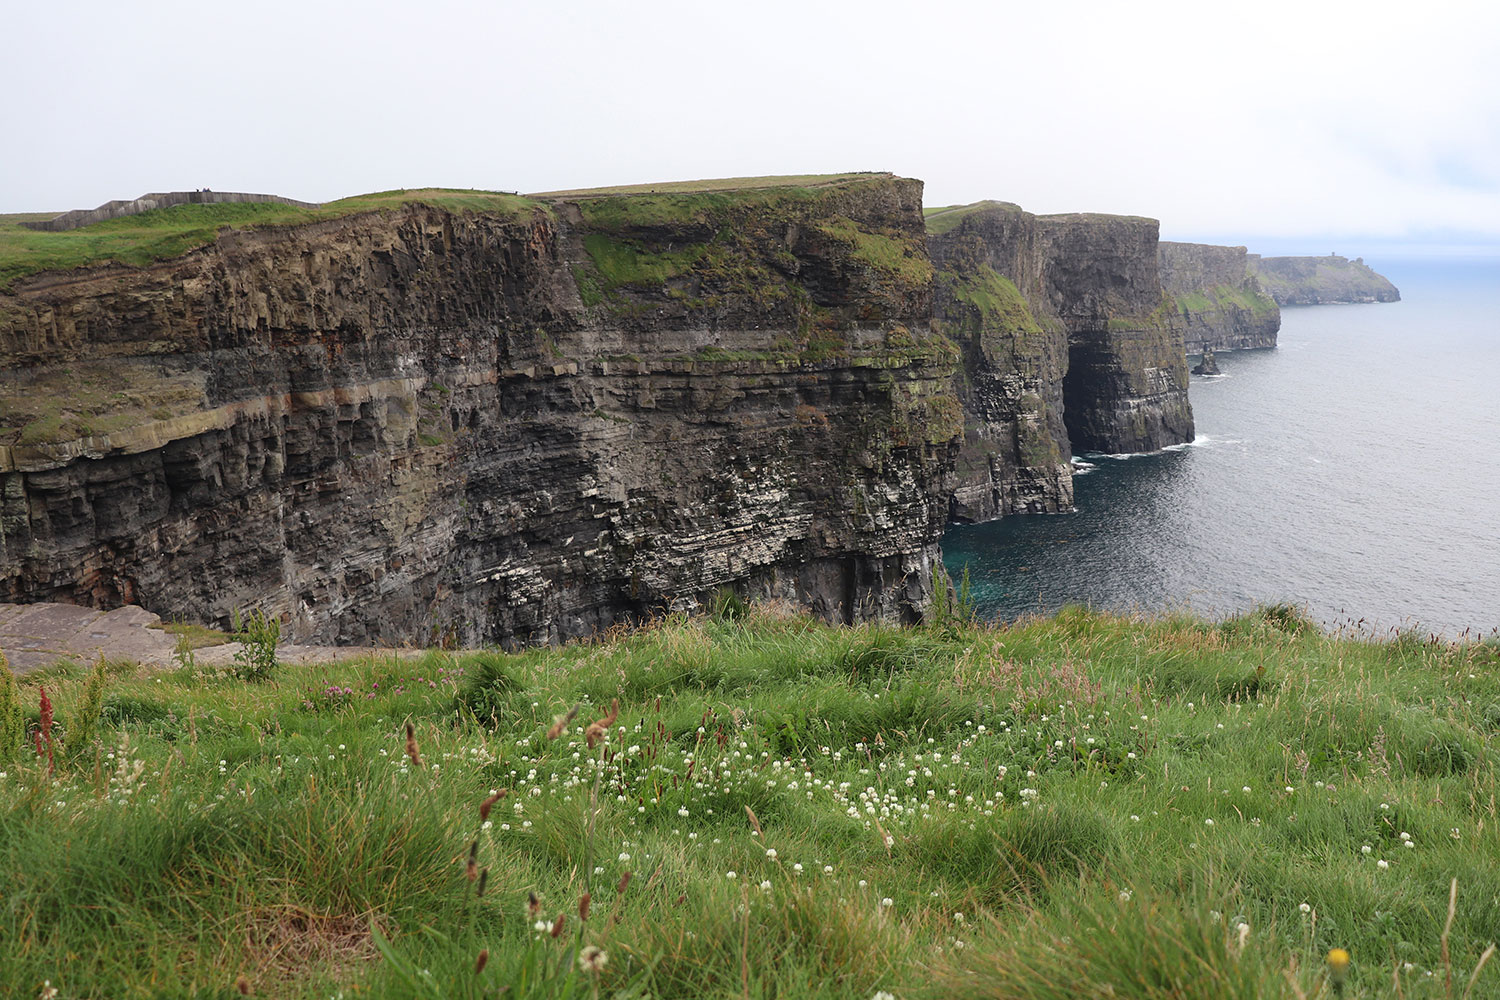 The Cliffs of Moher: Nature in Ireland